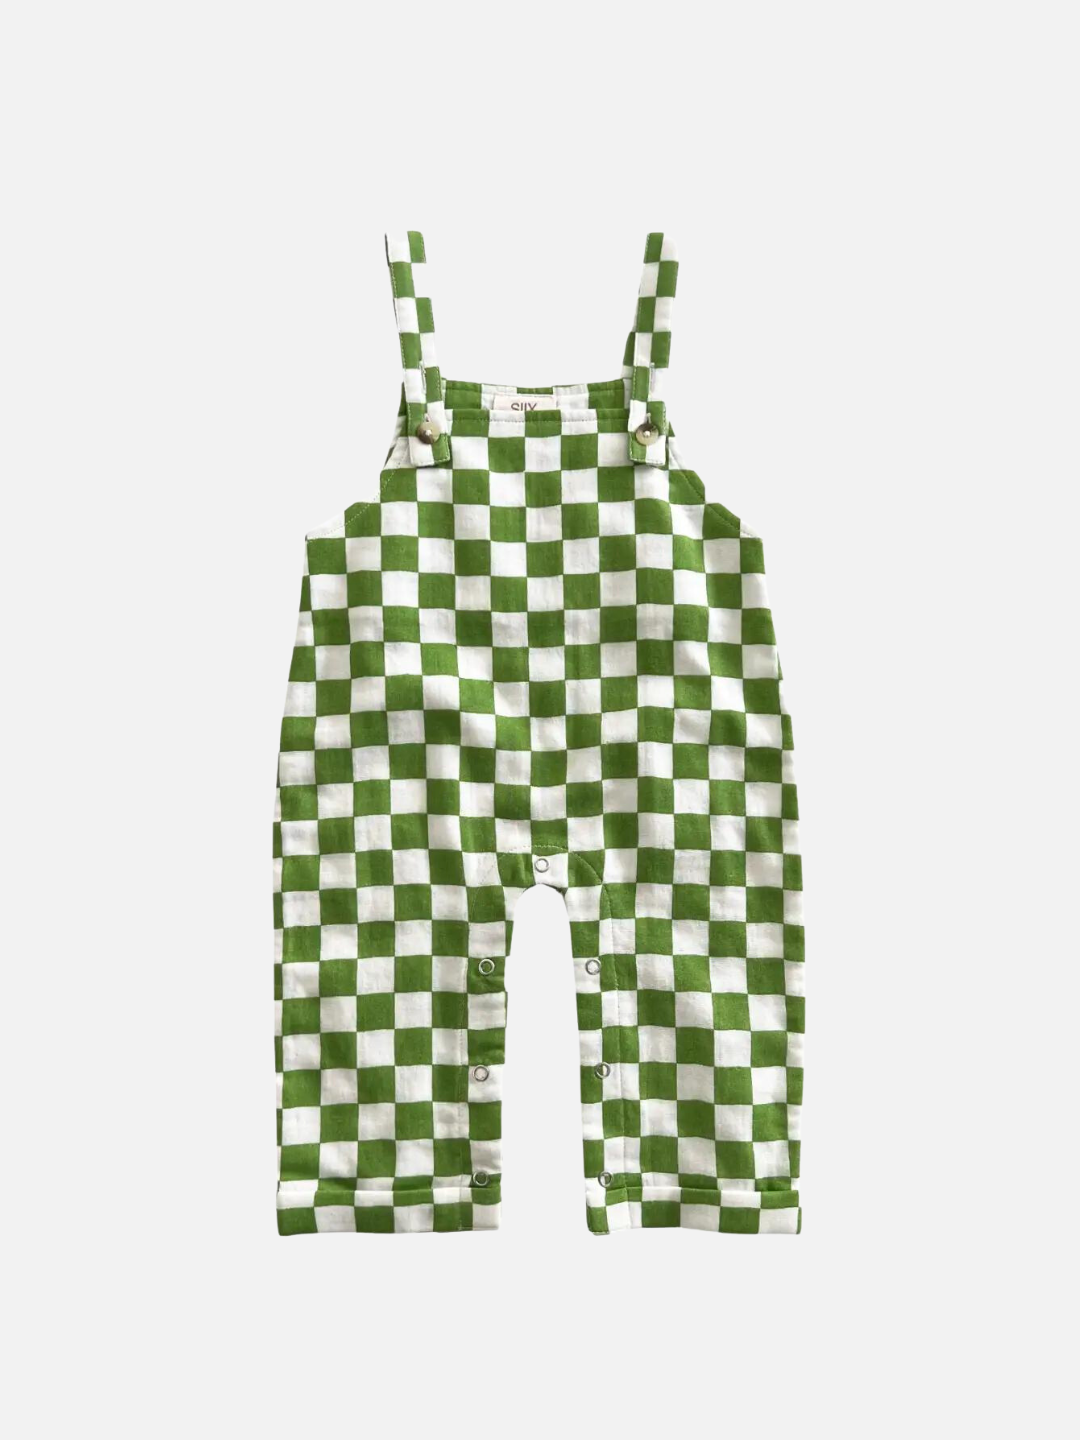 A pair of kids' overalls in grass green and white check